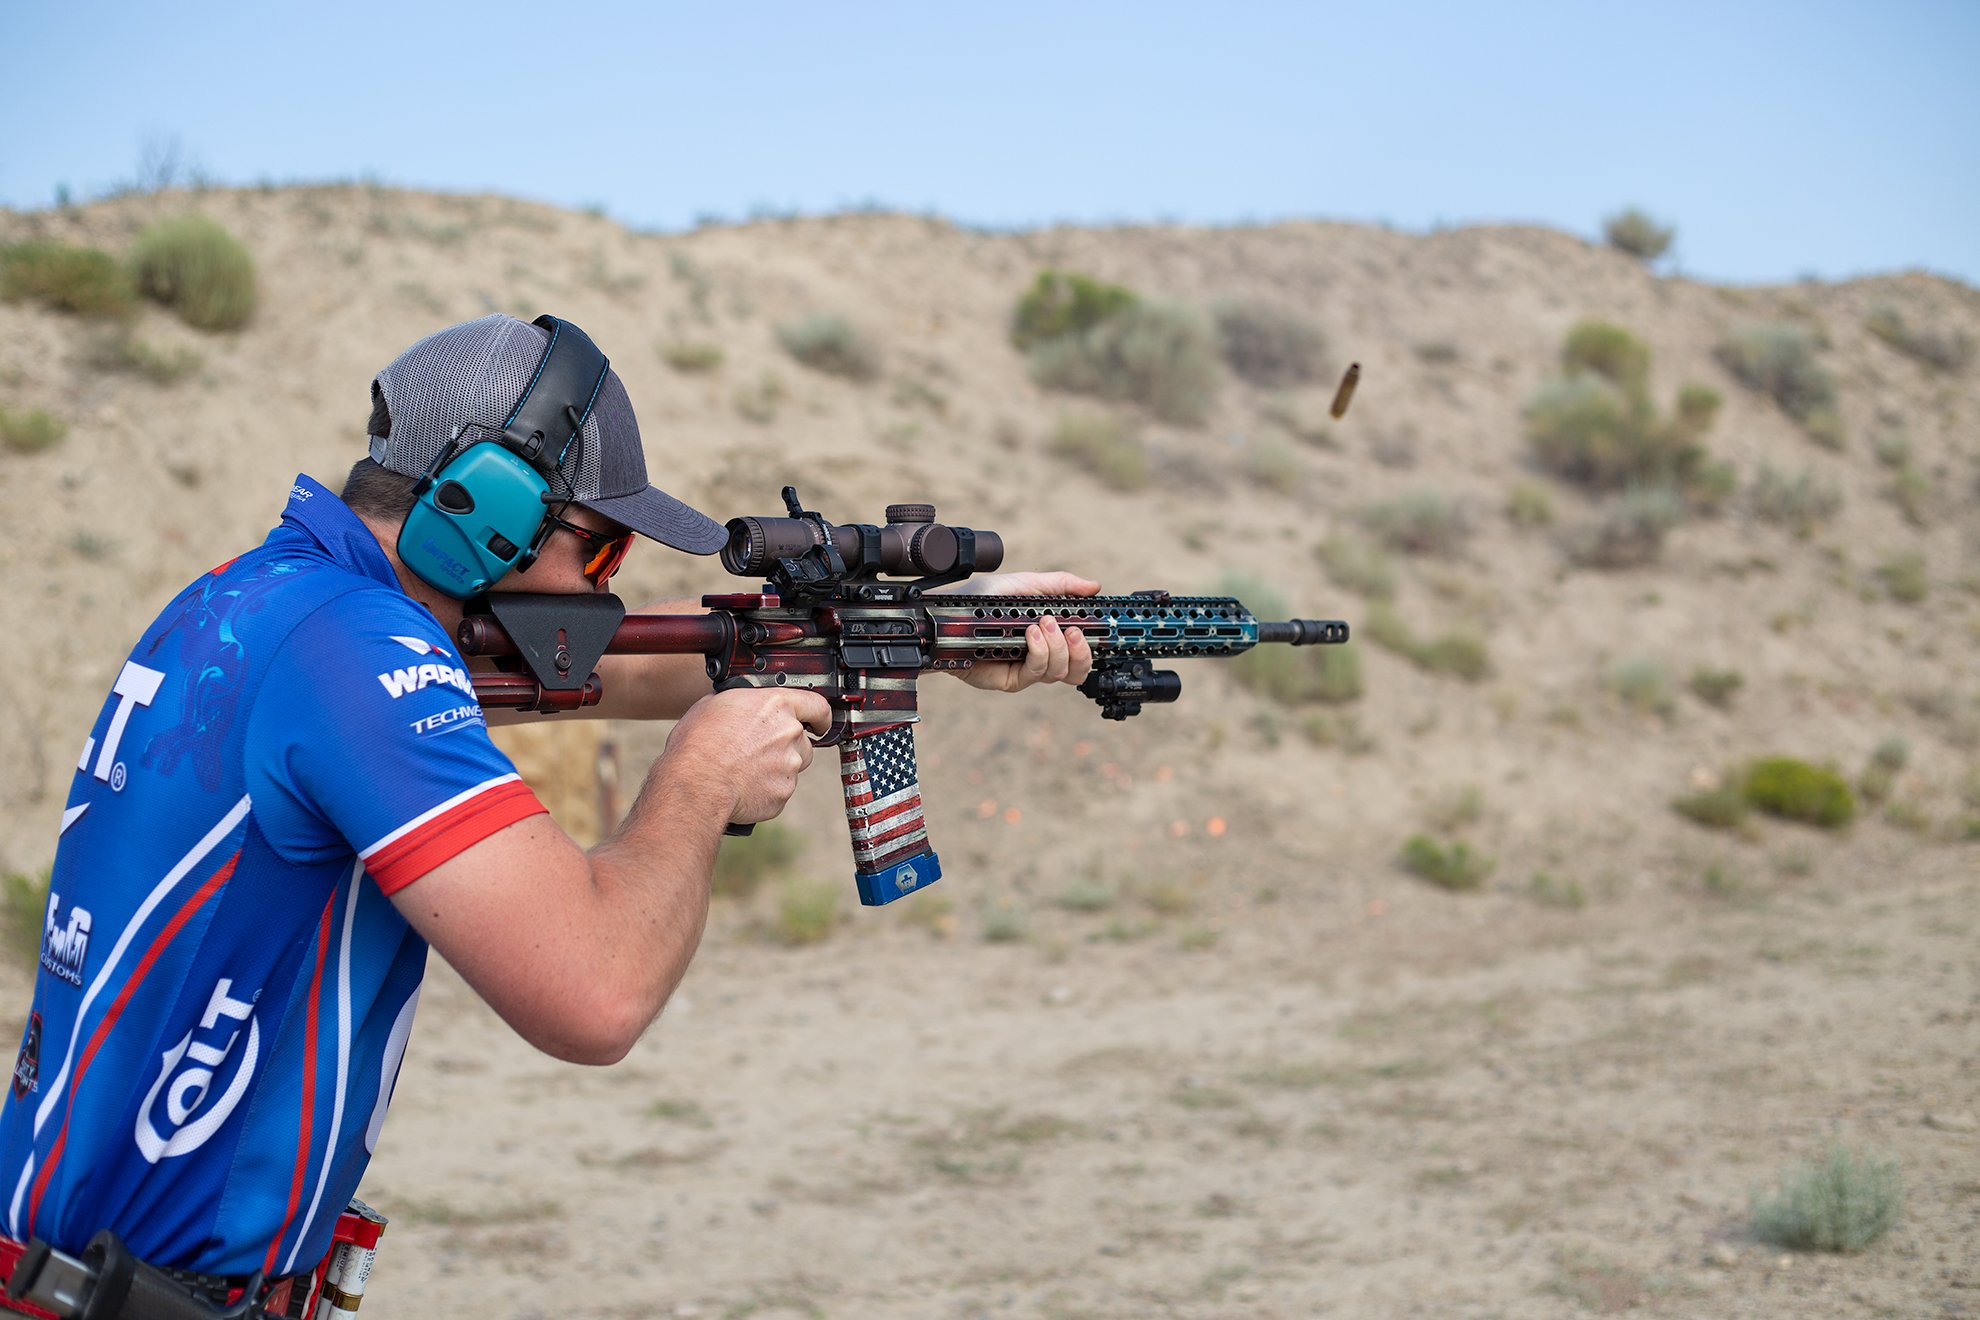 2022 SureFire World Multigun Championships ResultsWyoming event draws top shooting talent from across the U.S.